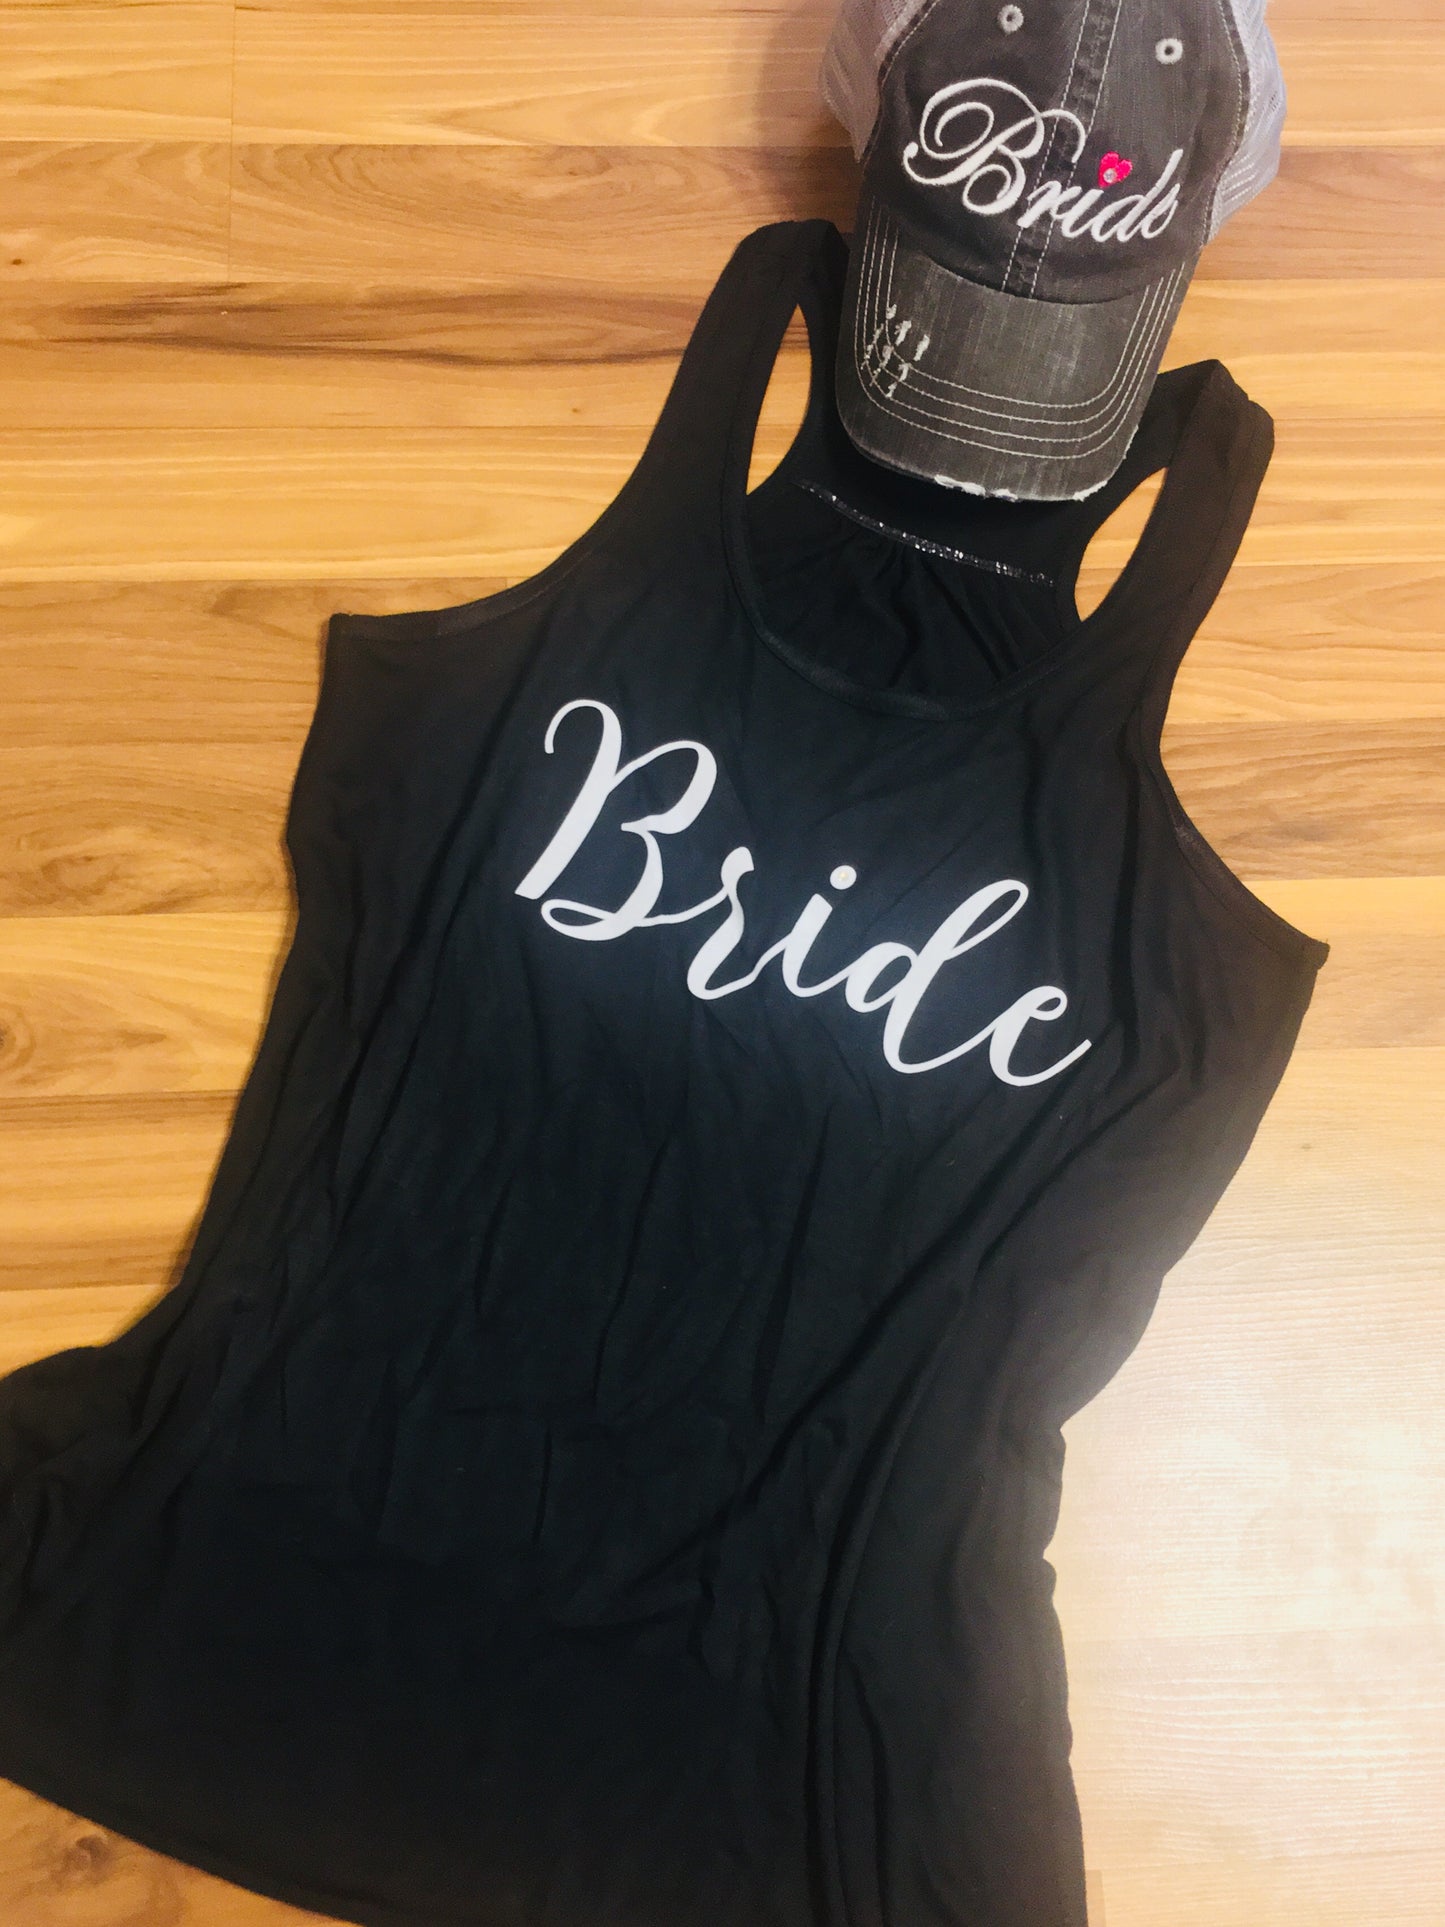 Hats and tanks { Bride } 1 gray hat $12 clearance. 1 black XL tank $15 clearance. - Stacy's Pink Martini Boutique